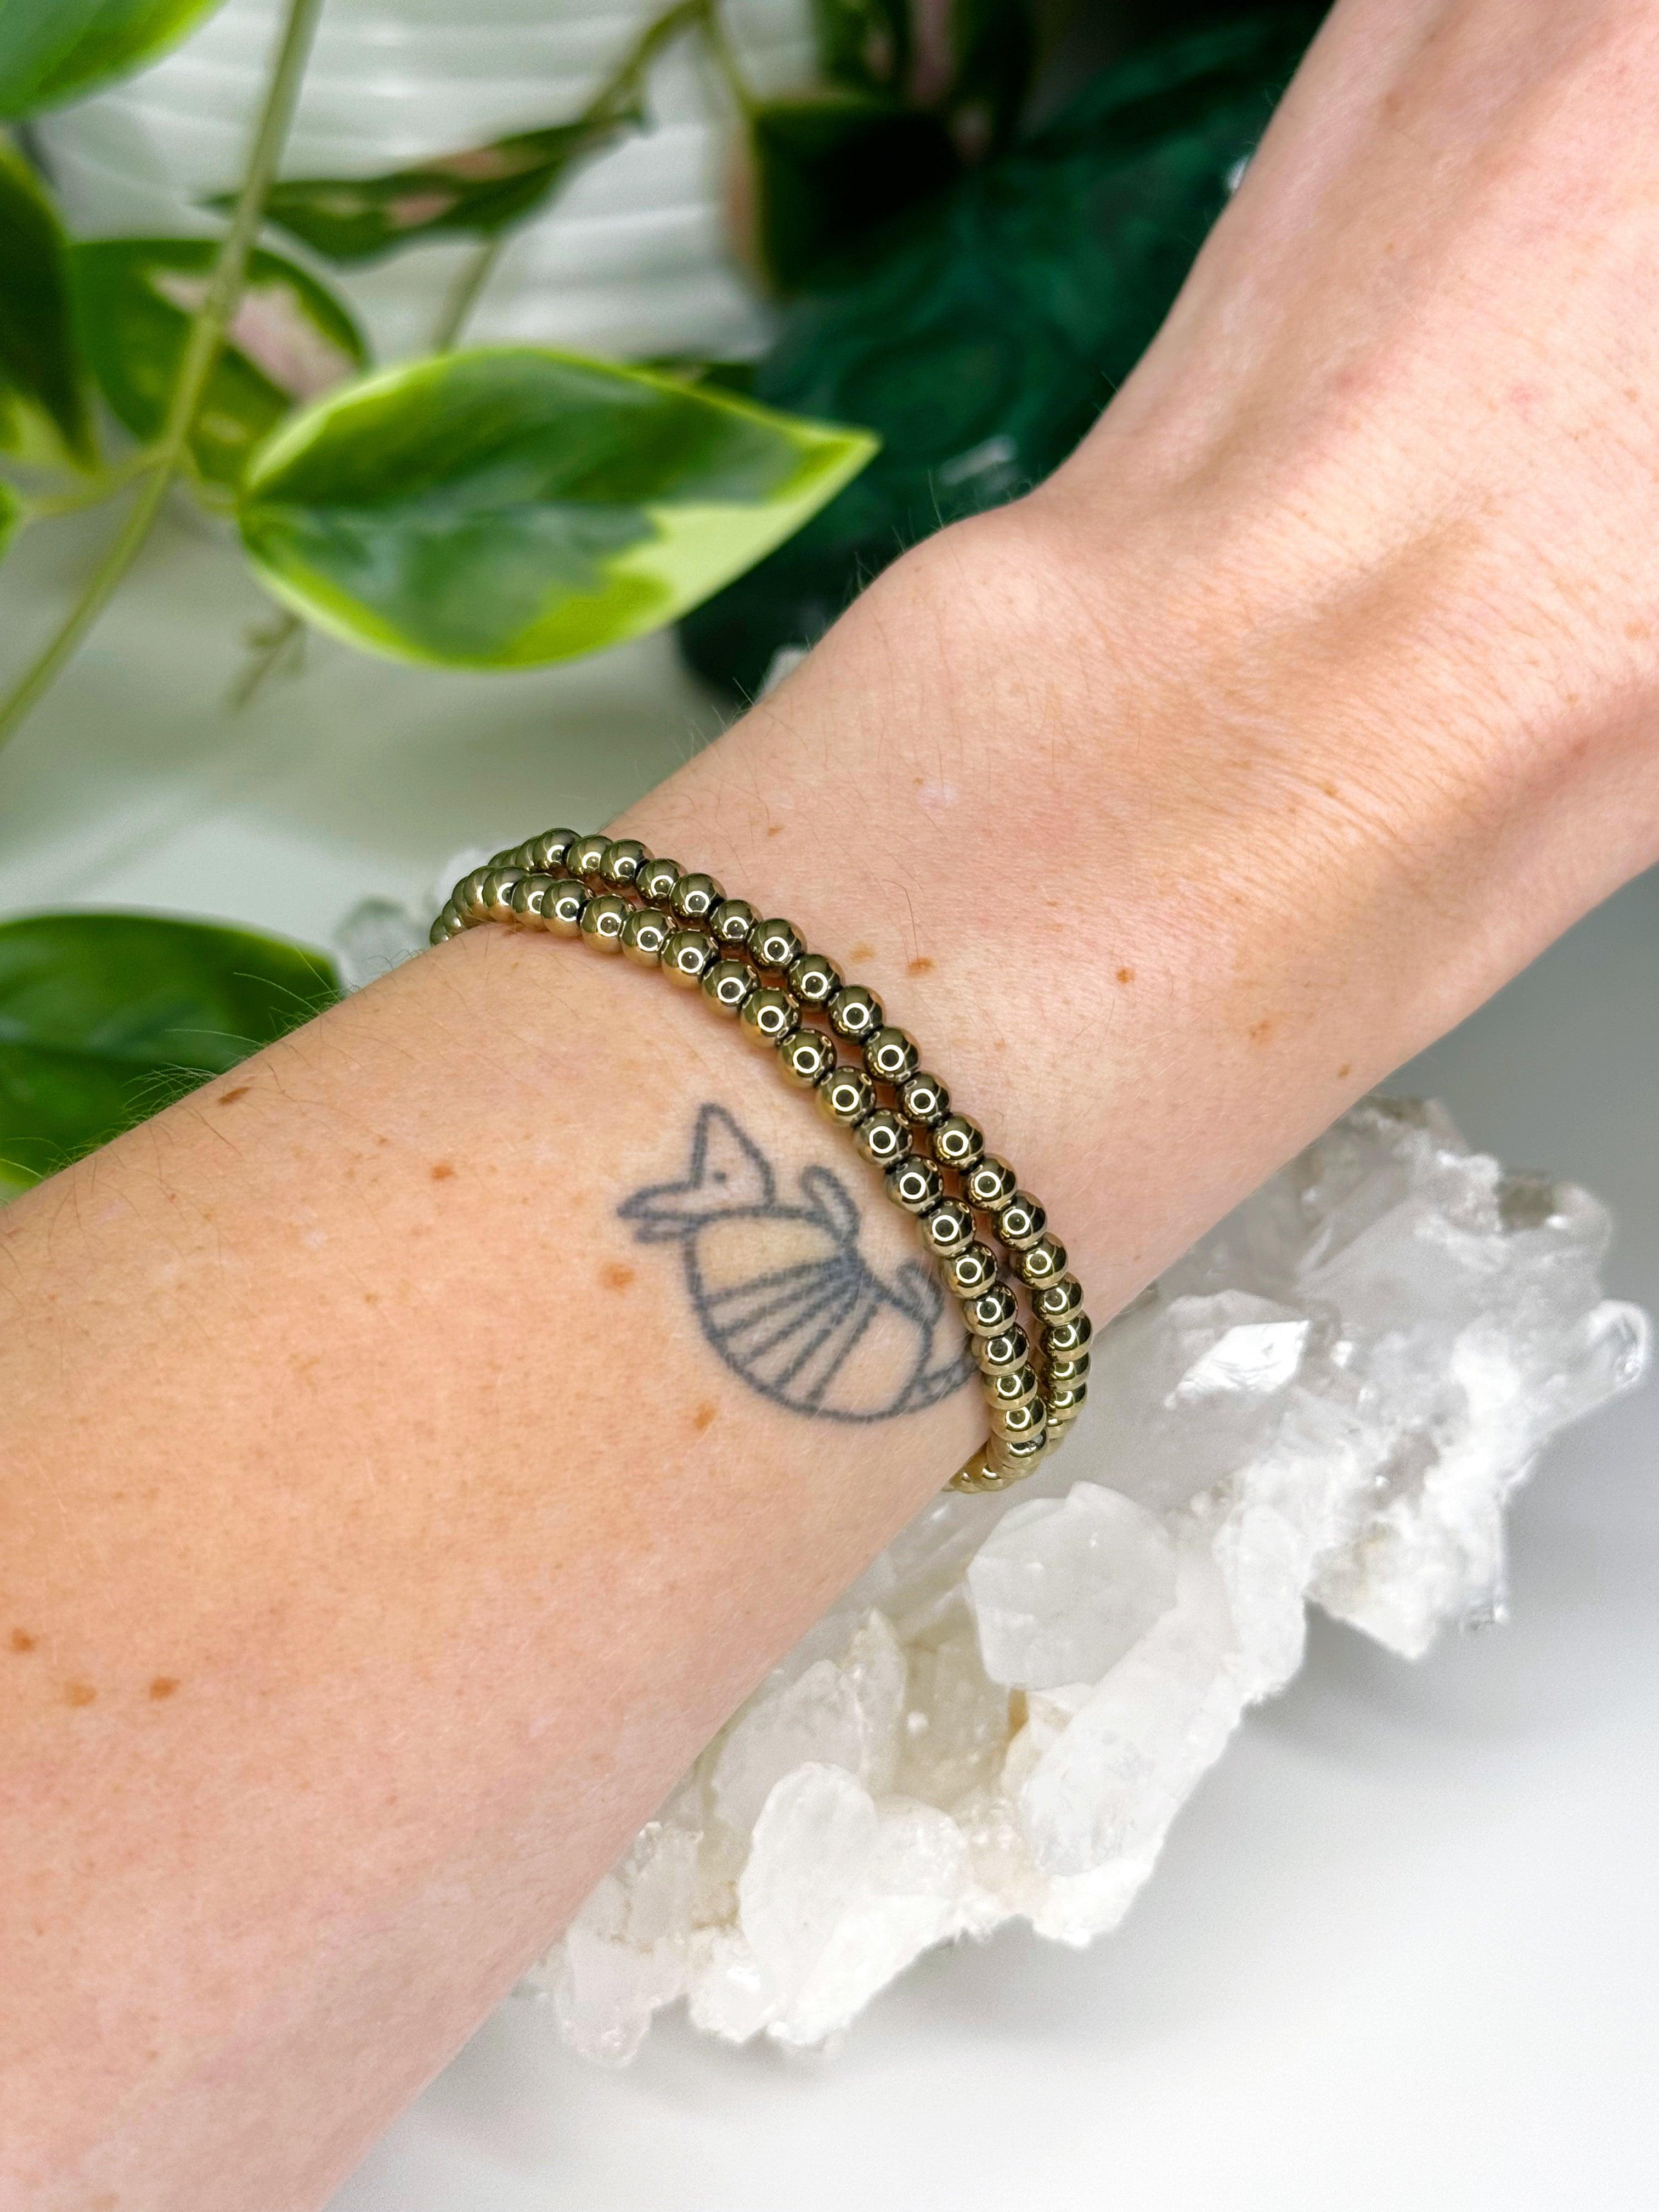 PYRITE 4mm - HANDMADE CRYSTAL BRACELET - 4mm, aries, bracelet, career, crystal bracelet, earth, fire, handmade bracelet, jewelry, leo, market bracelet, metallic, pyrite, recently added, solstice collection, Wearable, winter solstice collection - The Mineral Maven